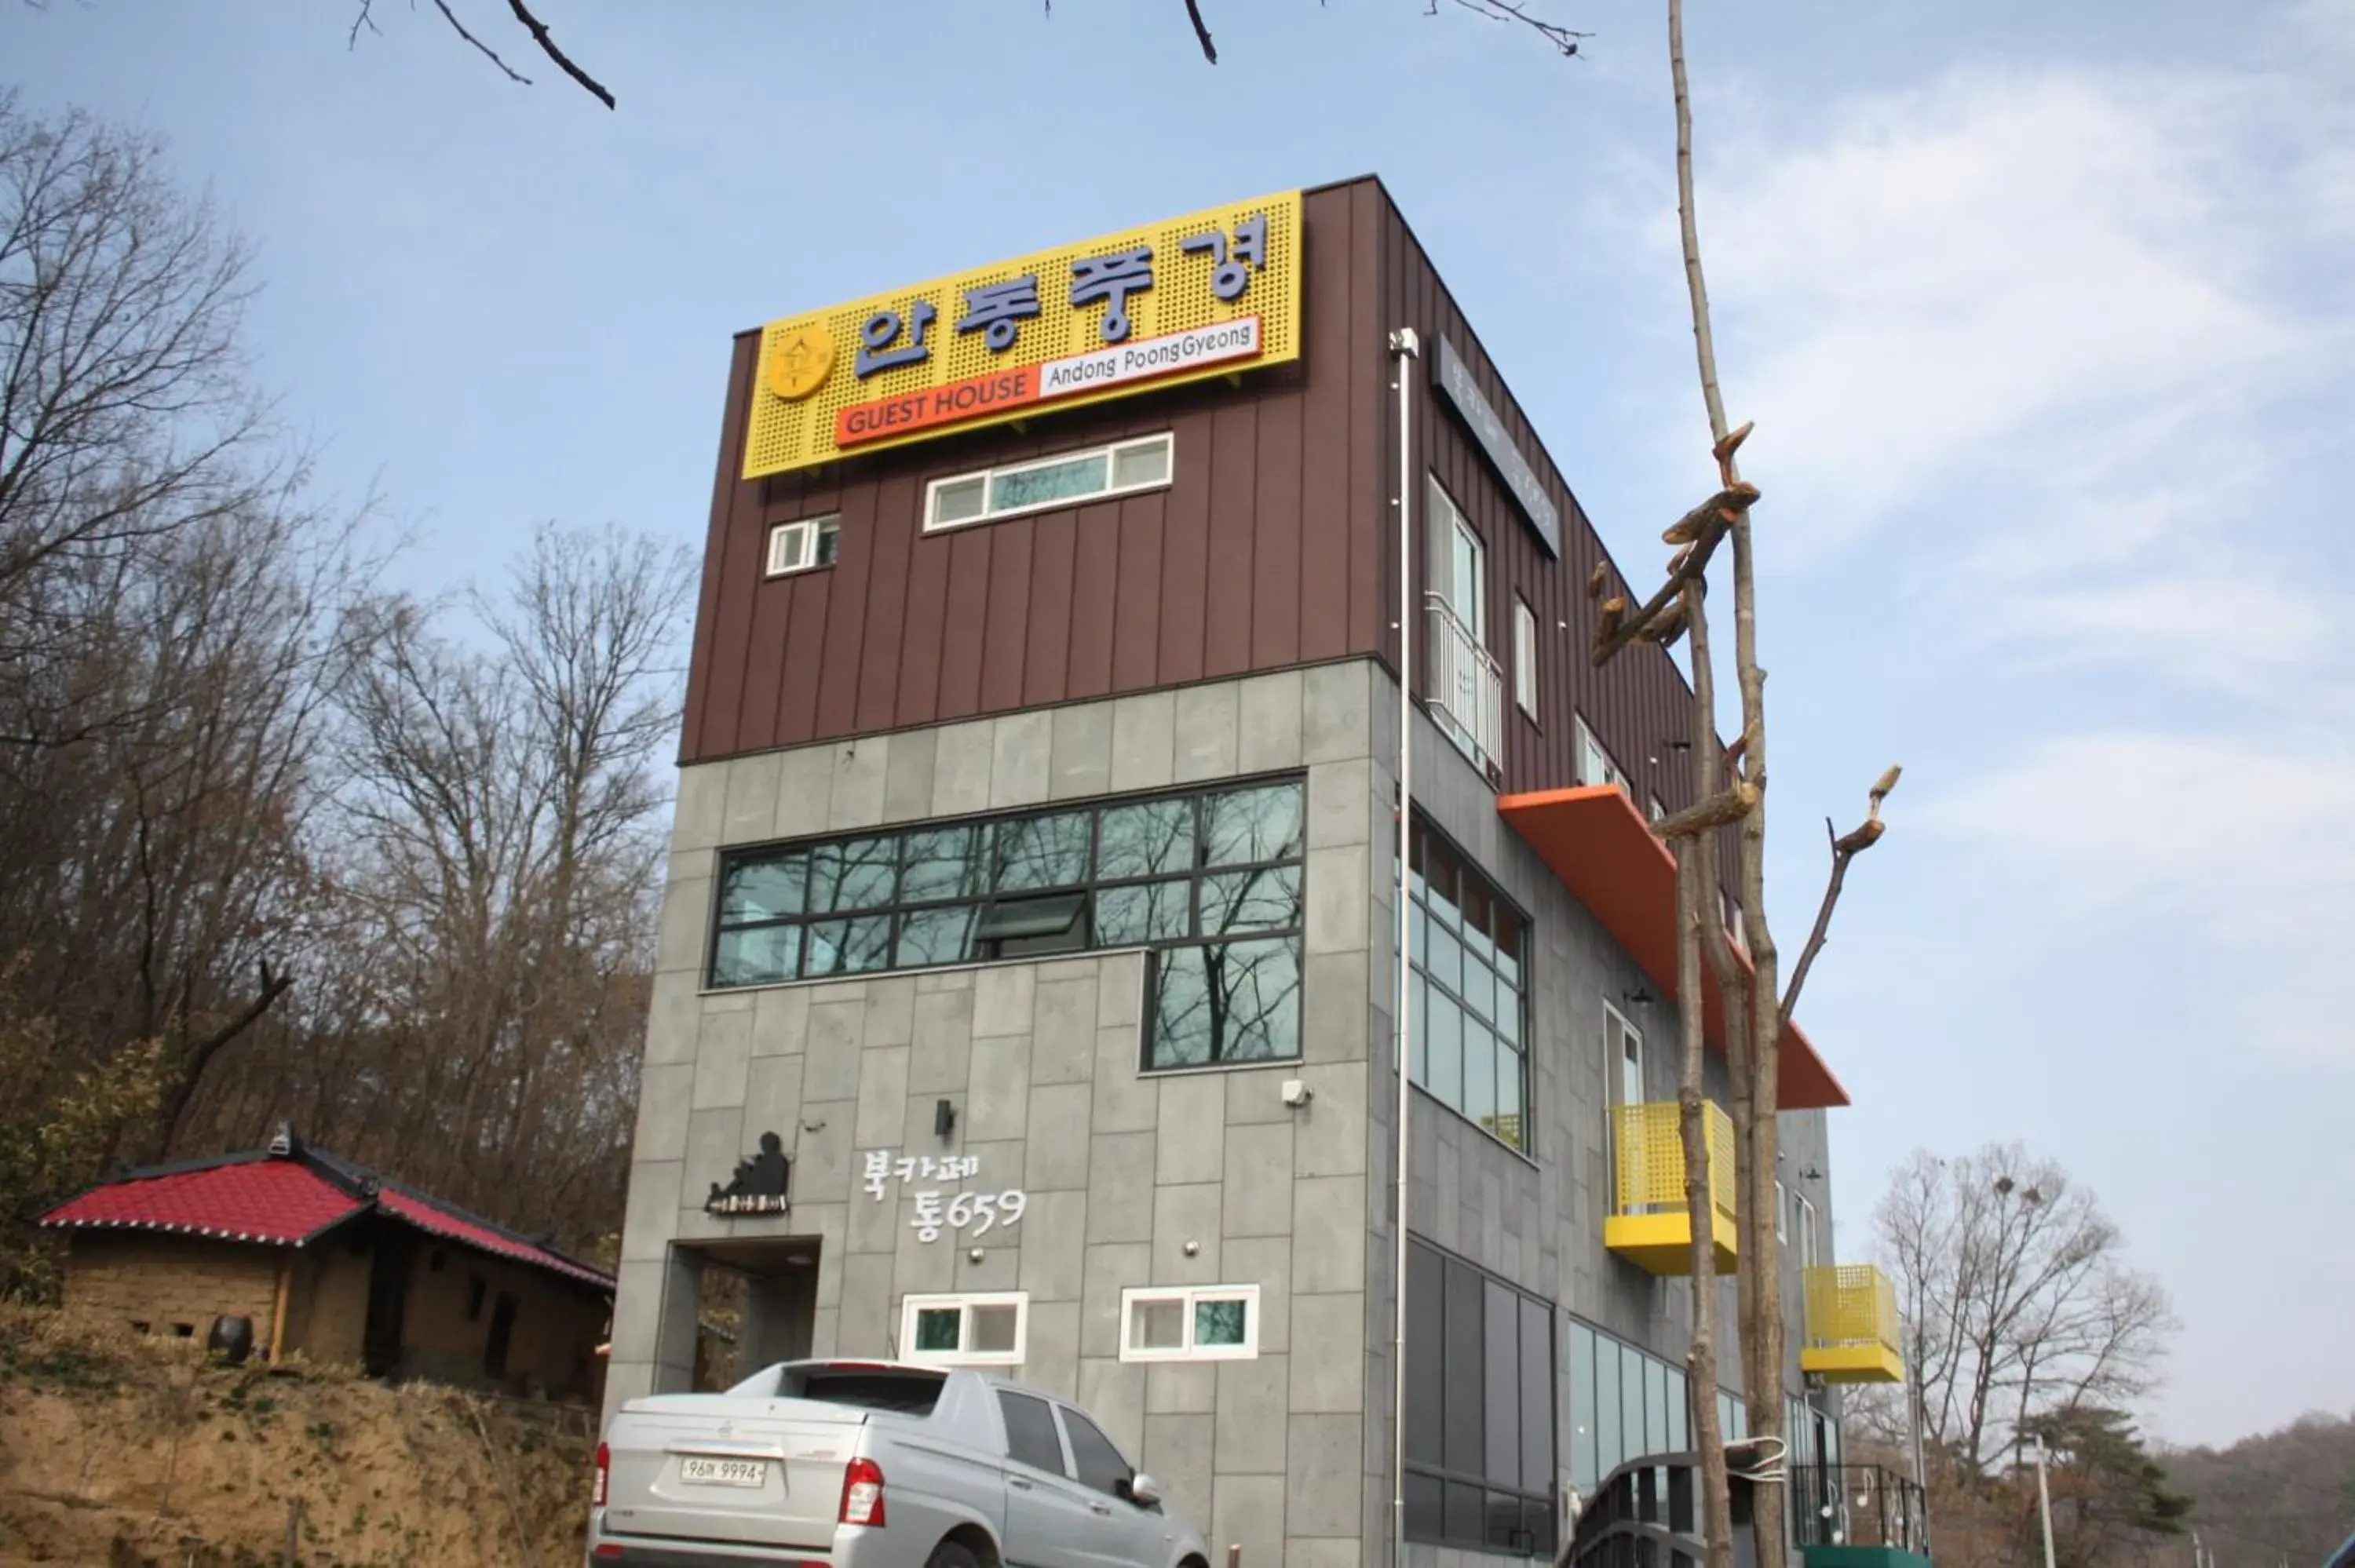 Day, Property Building in Andong Poong-gyung HOSTEL n LIBRARY